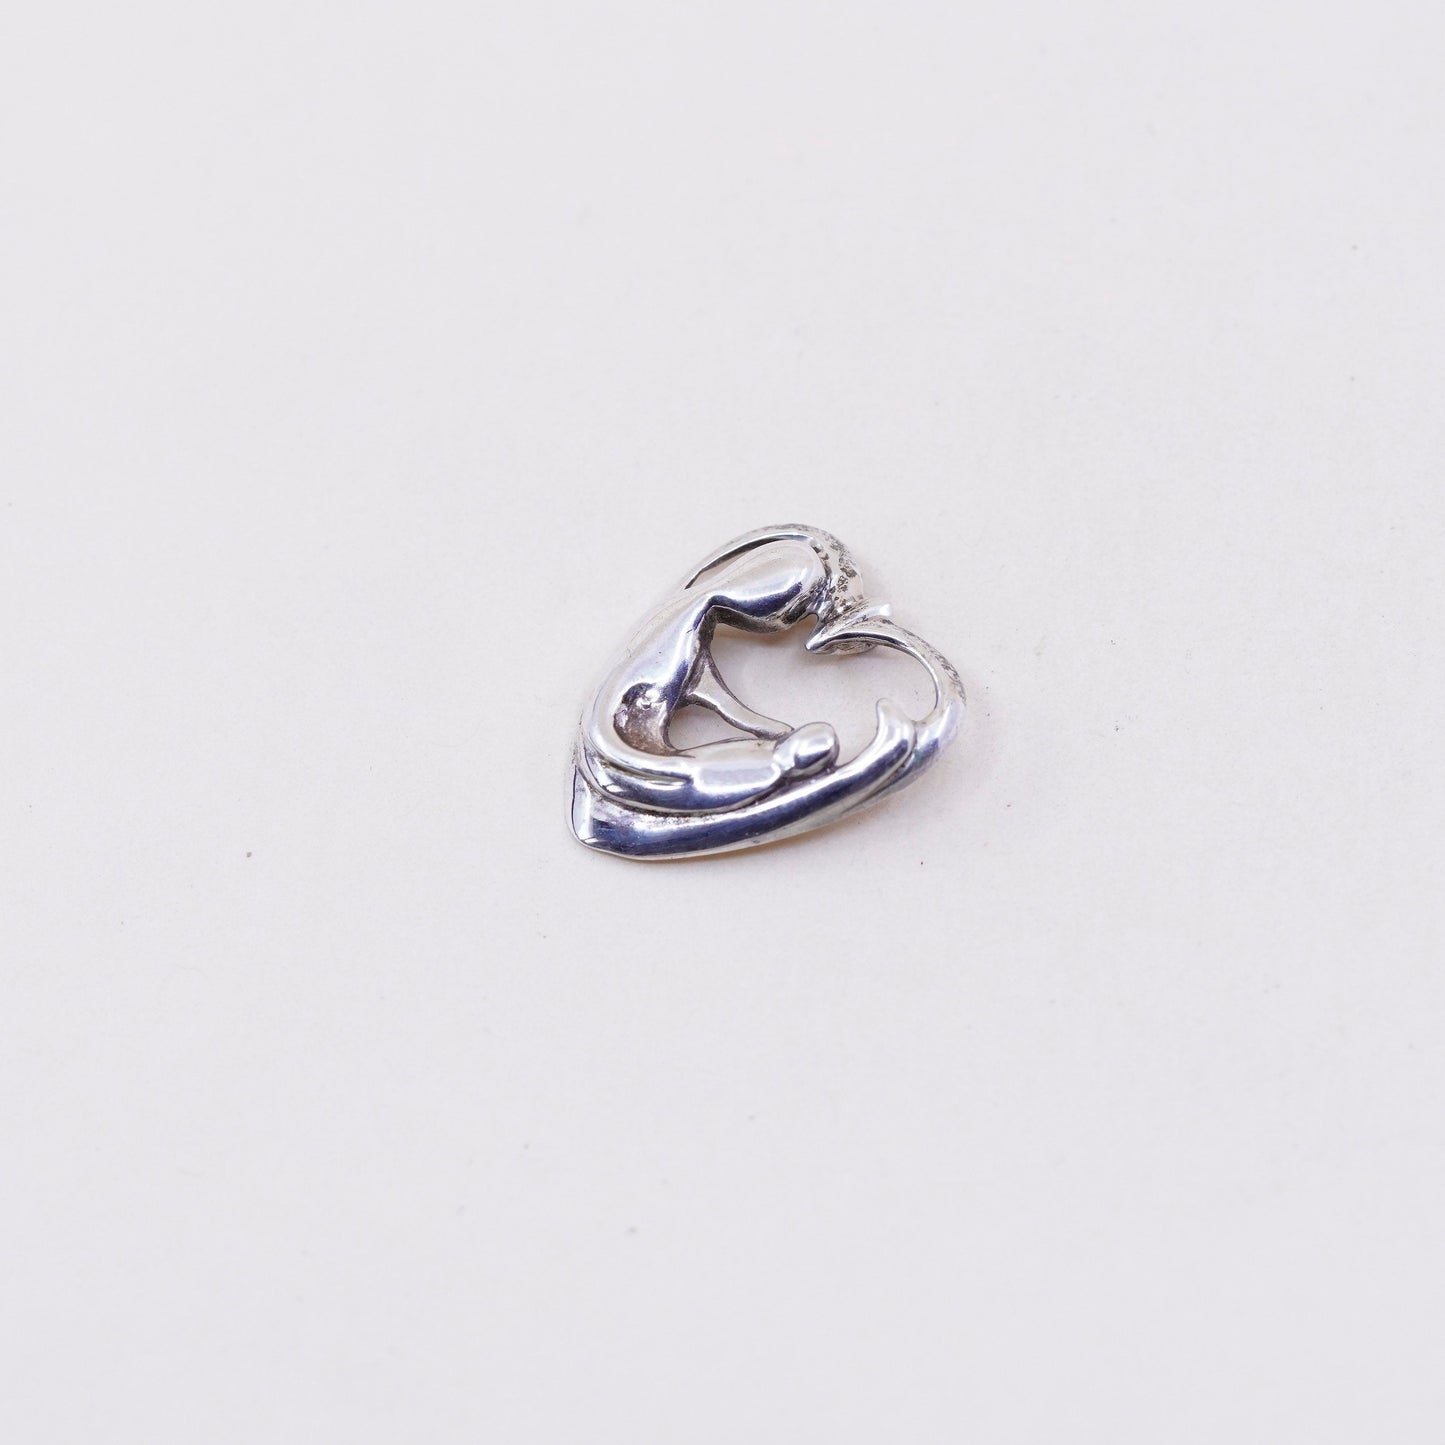 Vintage sterling silver handmade pendant, heart 925 pendant, Mother and baby